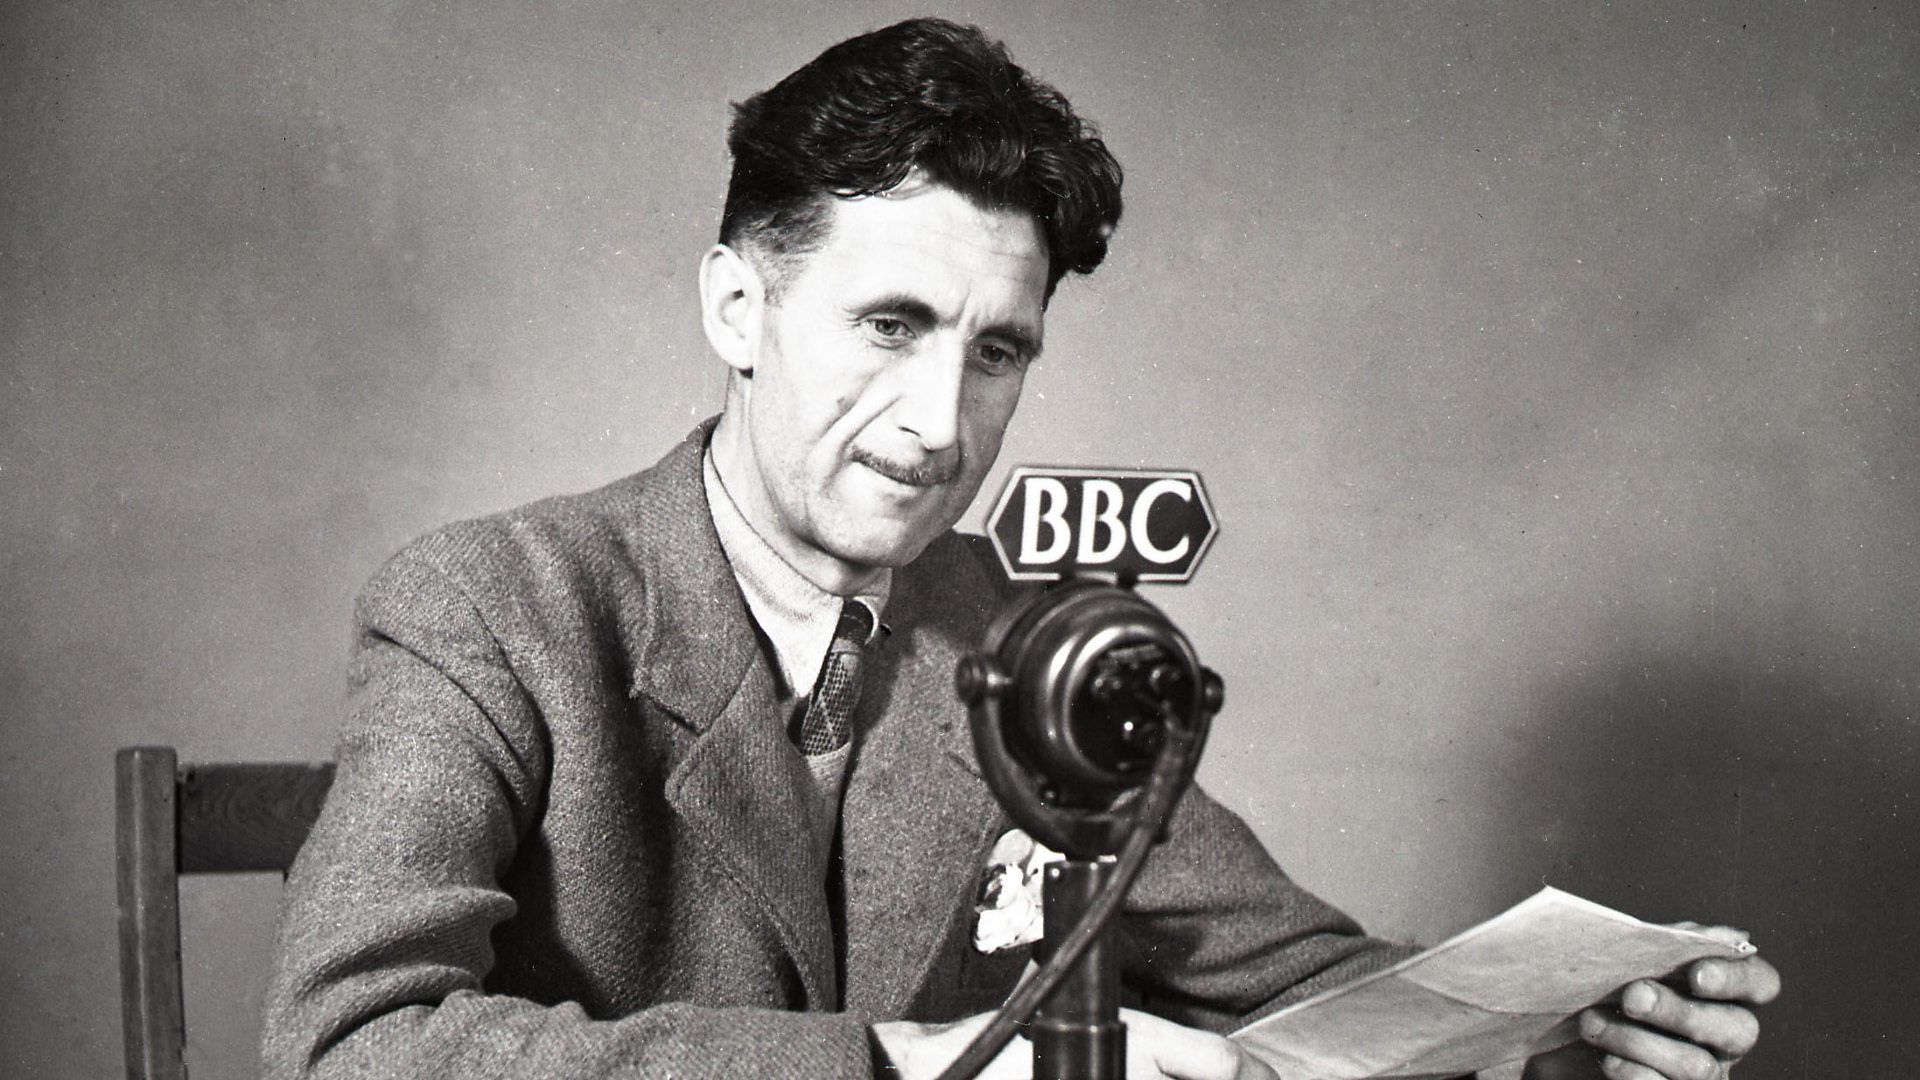 George Orwell Holding Papers And Speaking In Mic Labeled BBC